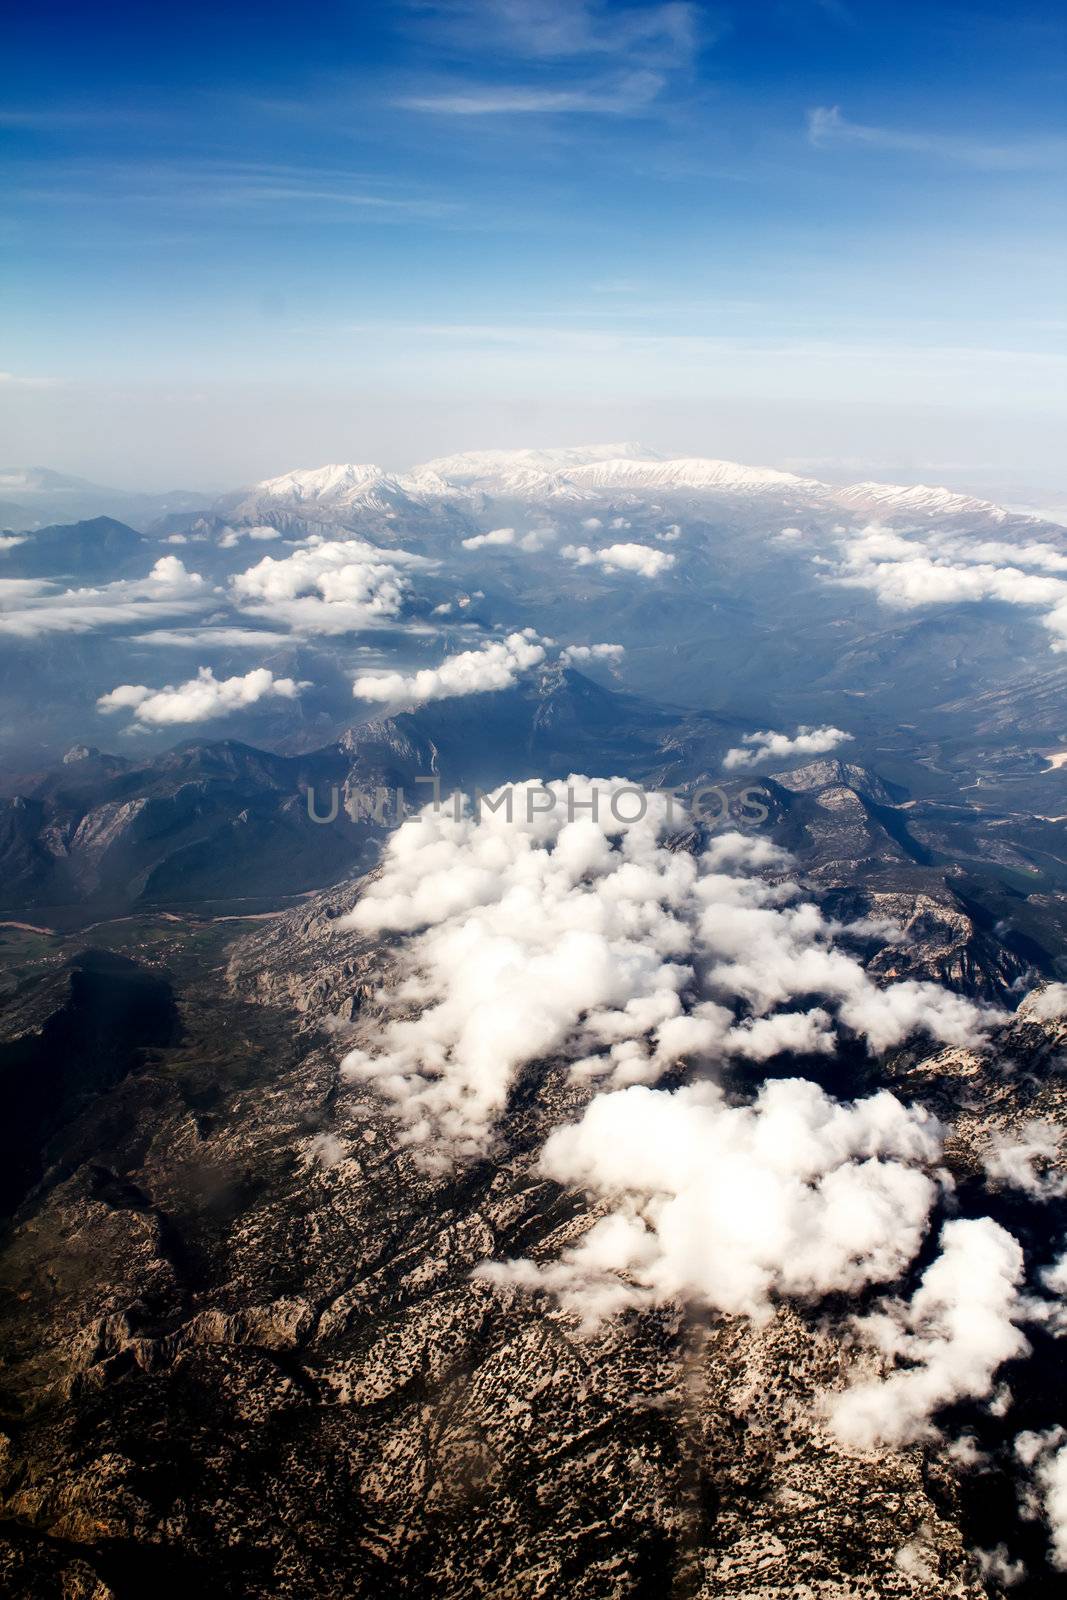 view of the mountains from an airplane above the clouds